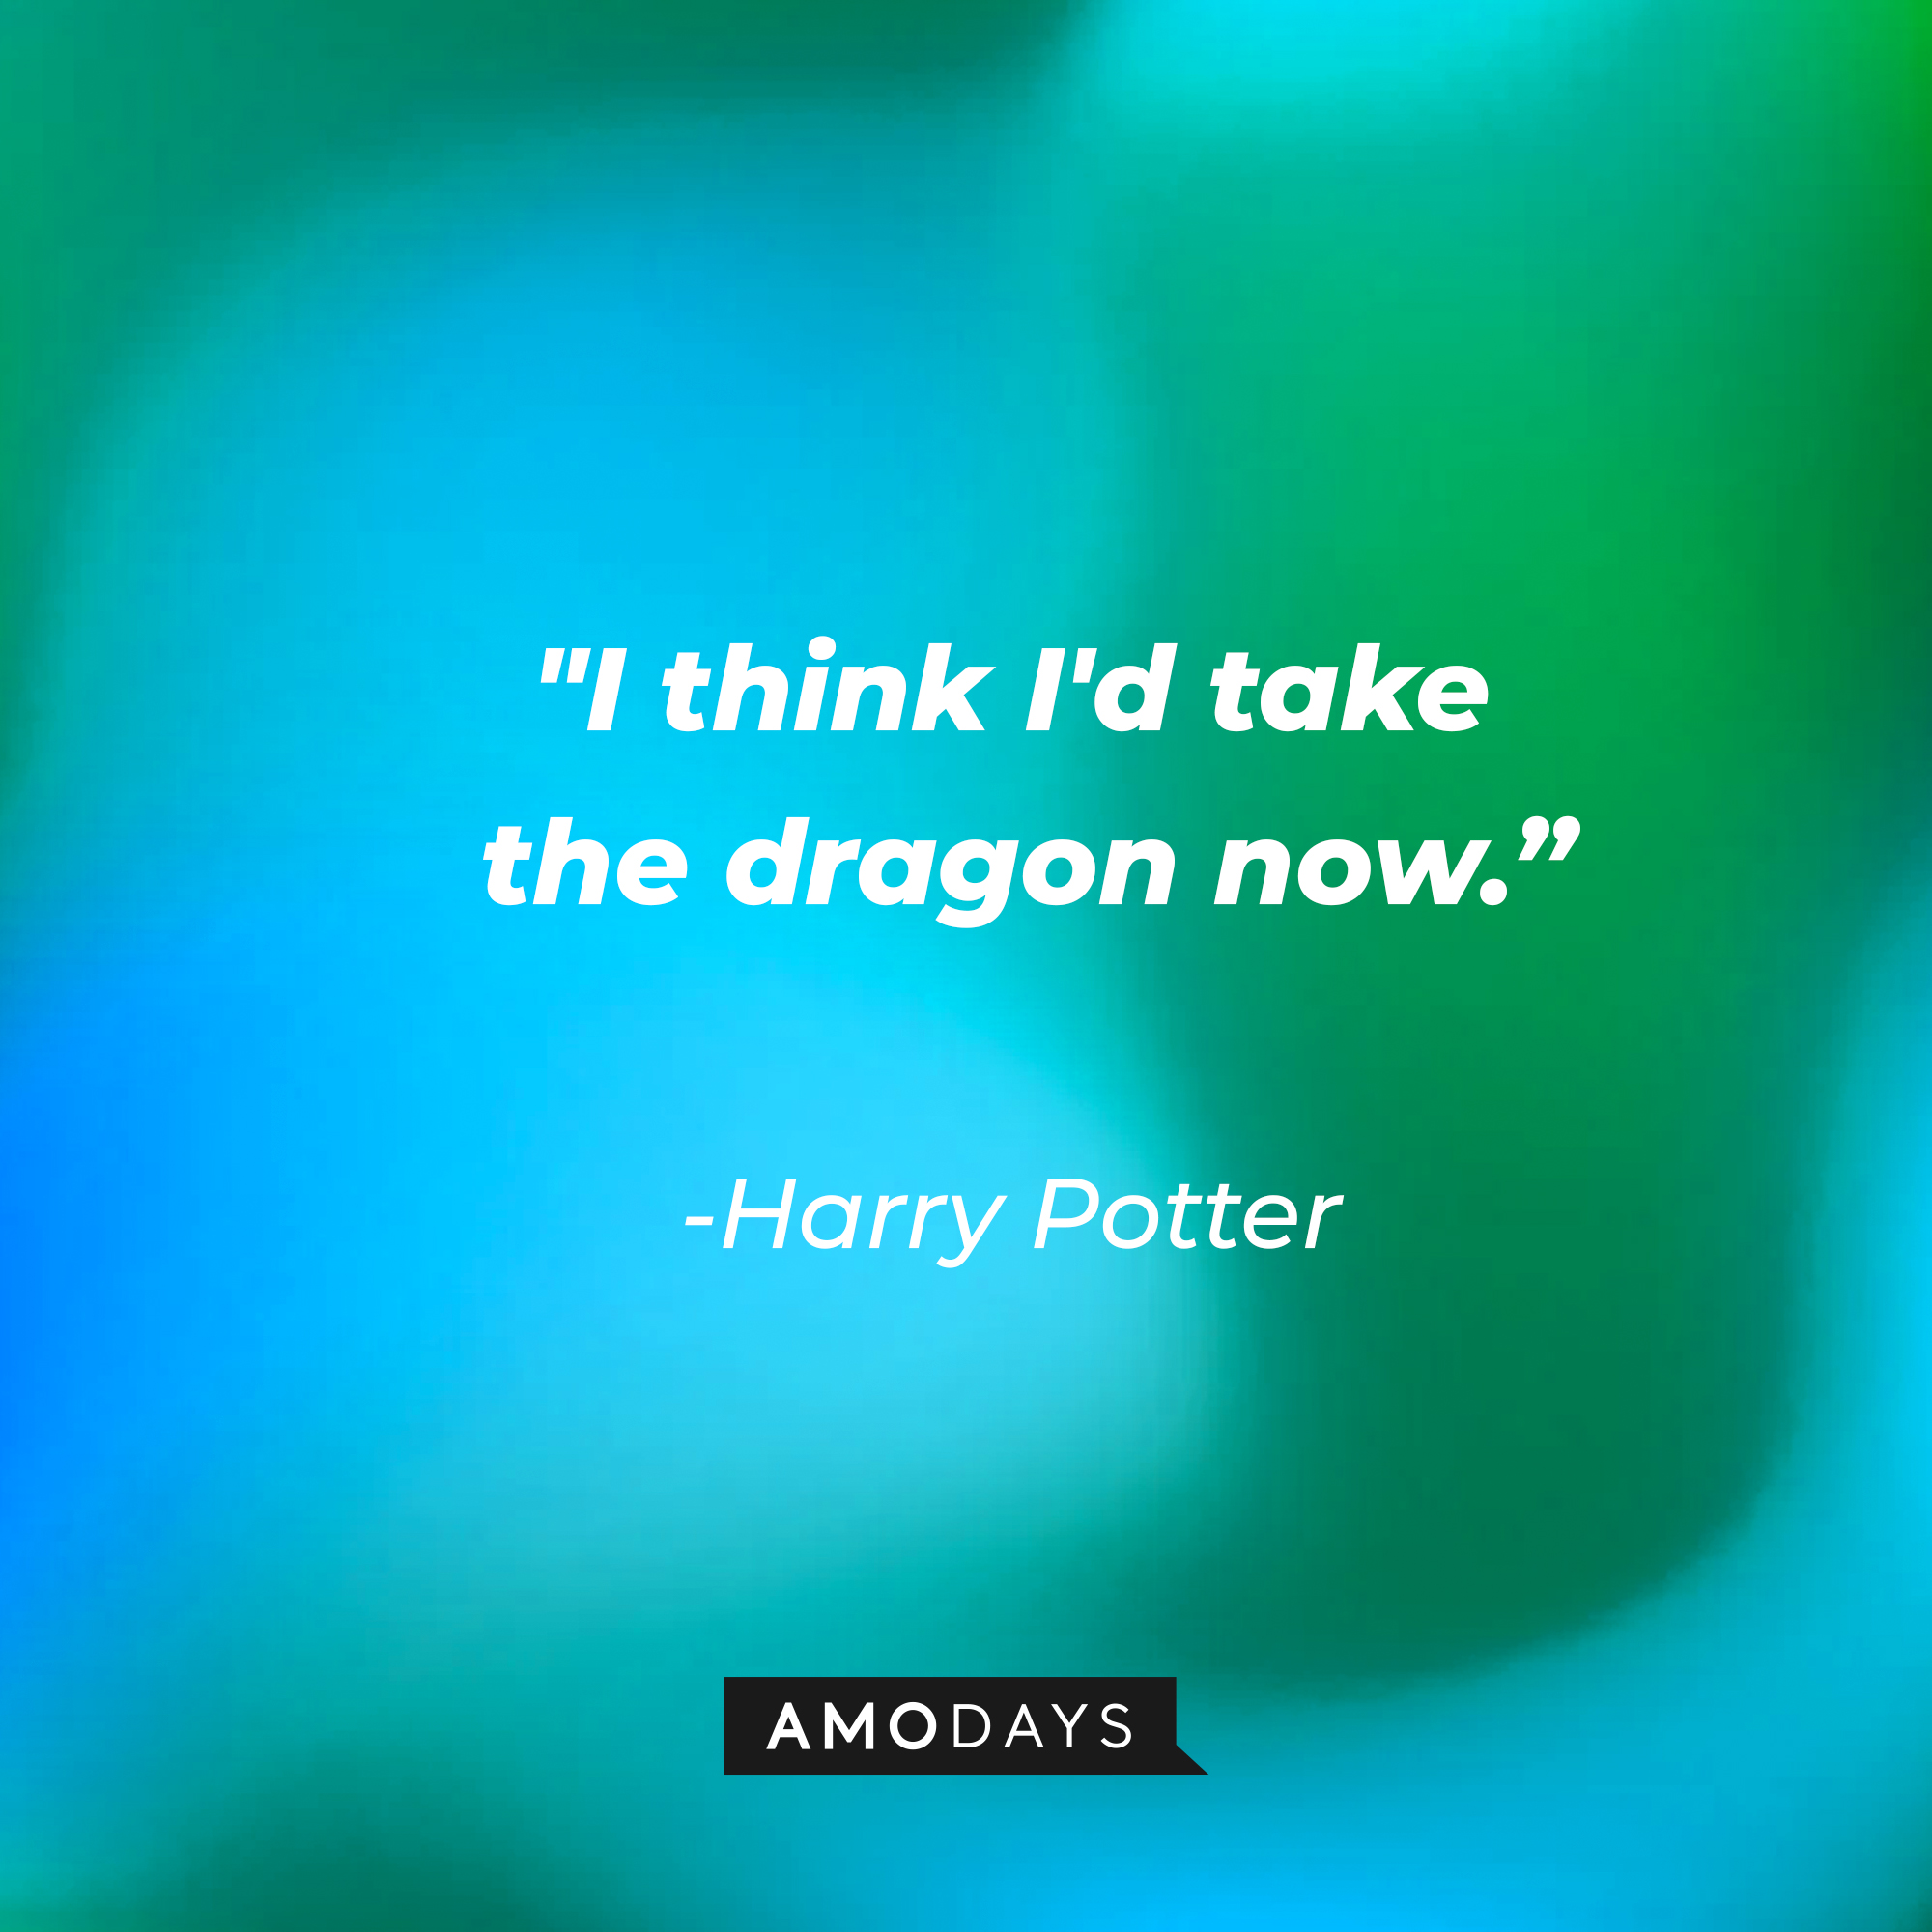 Harry Potter's quote: "I think I'd take the dragon now." | Image: Amodays